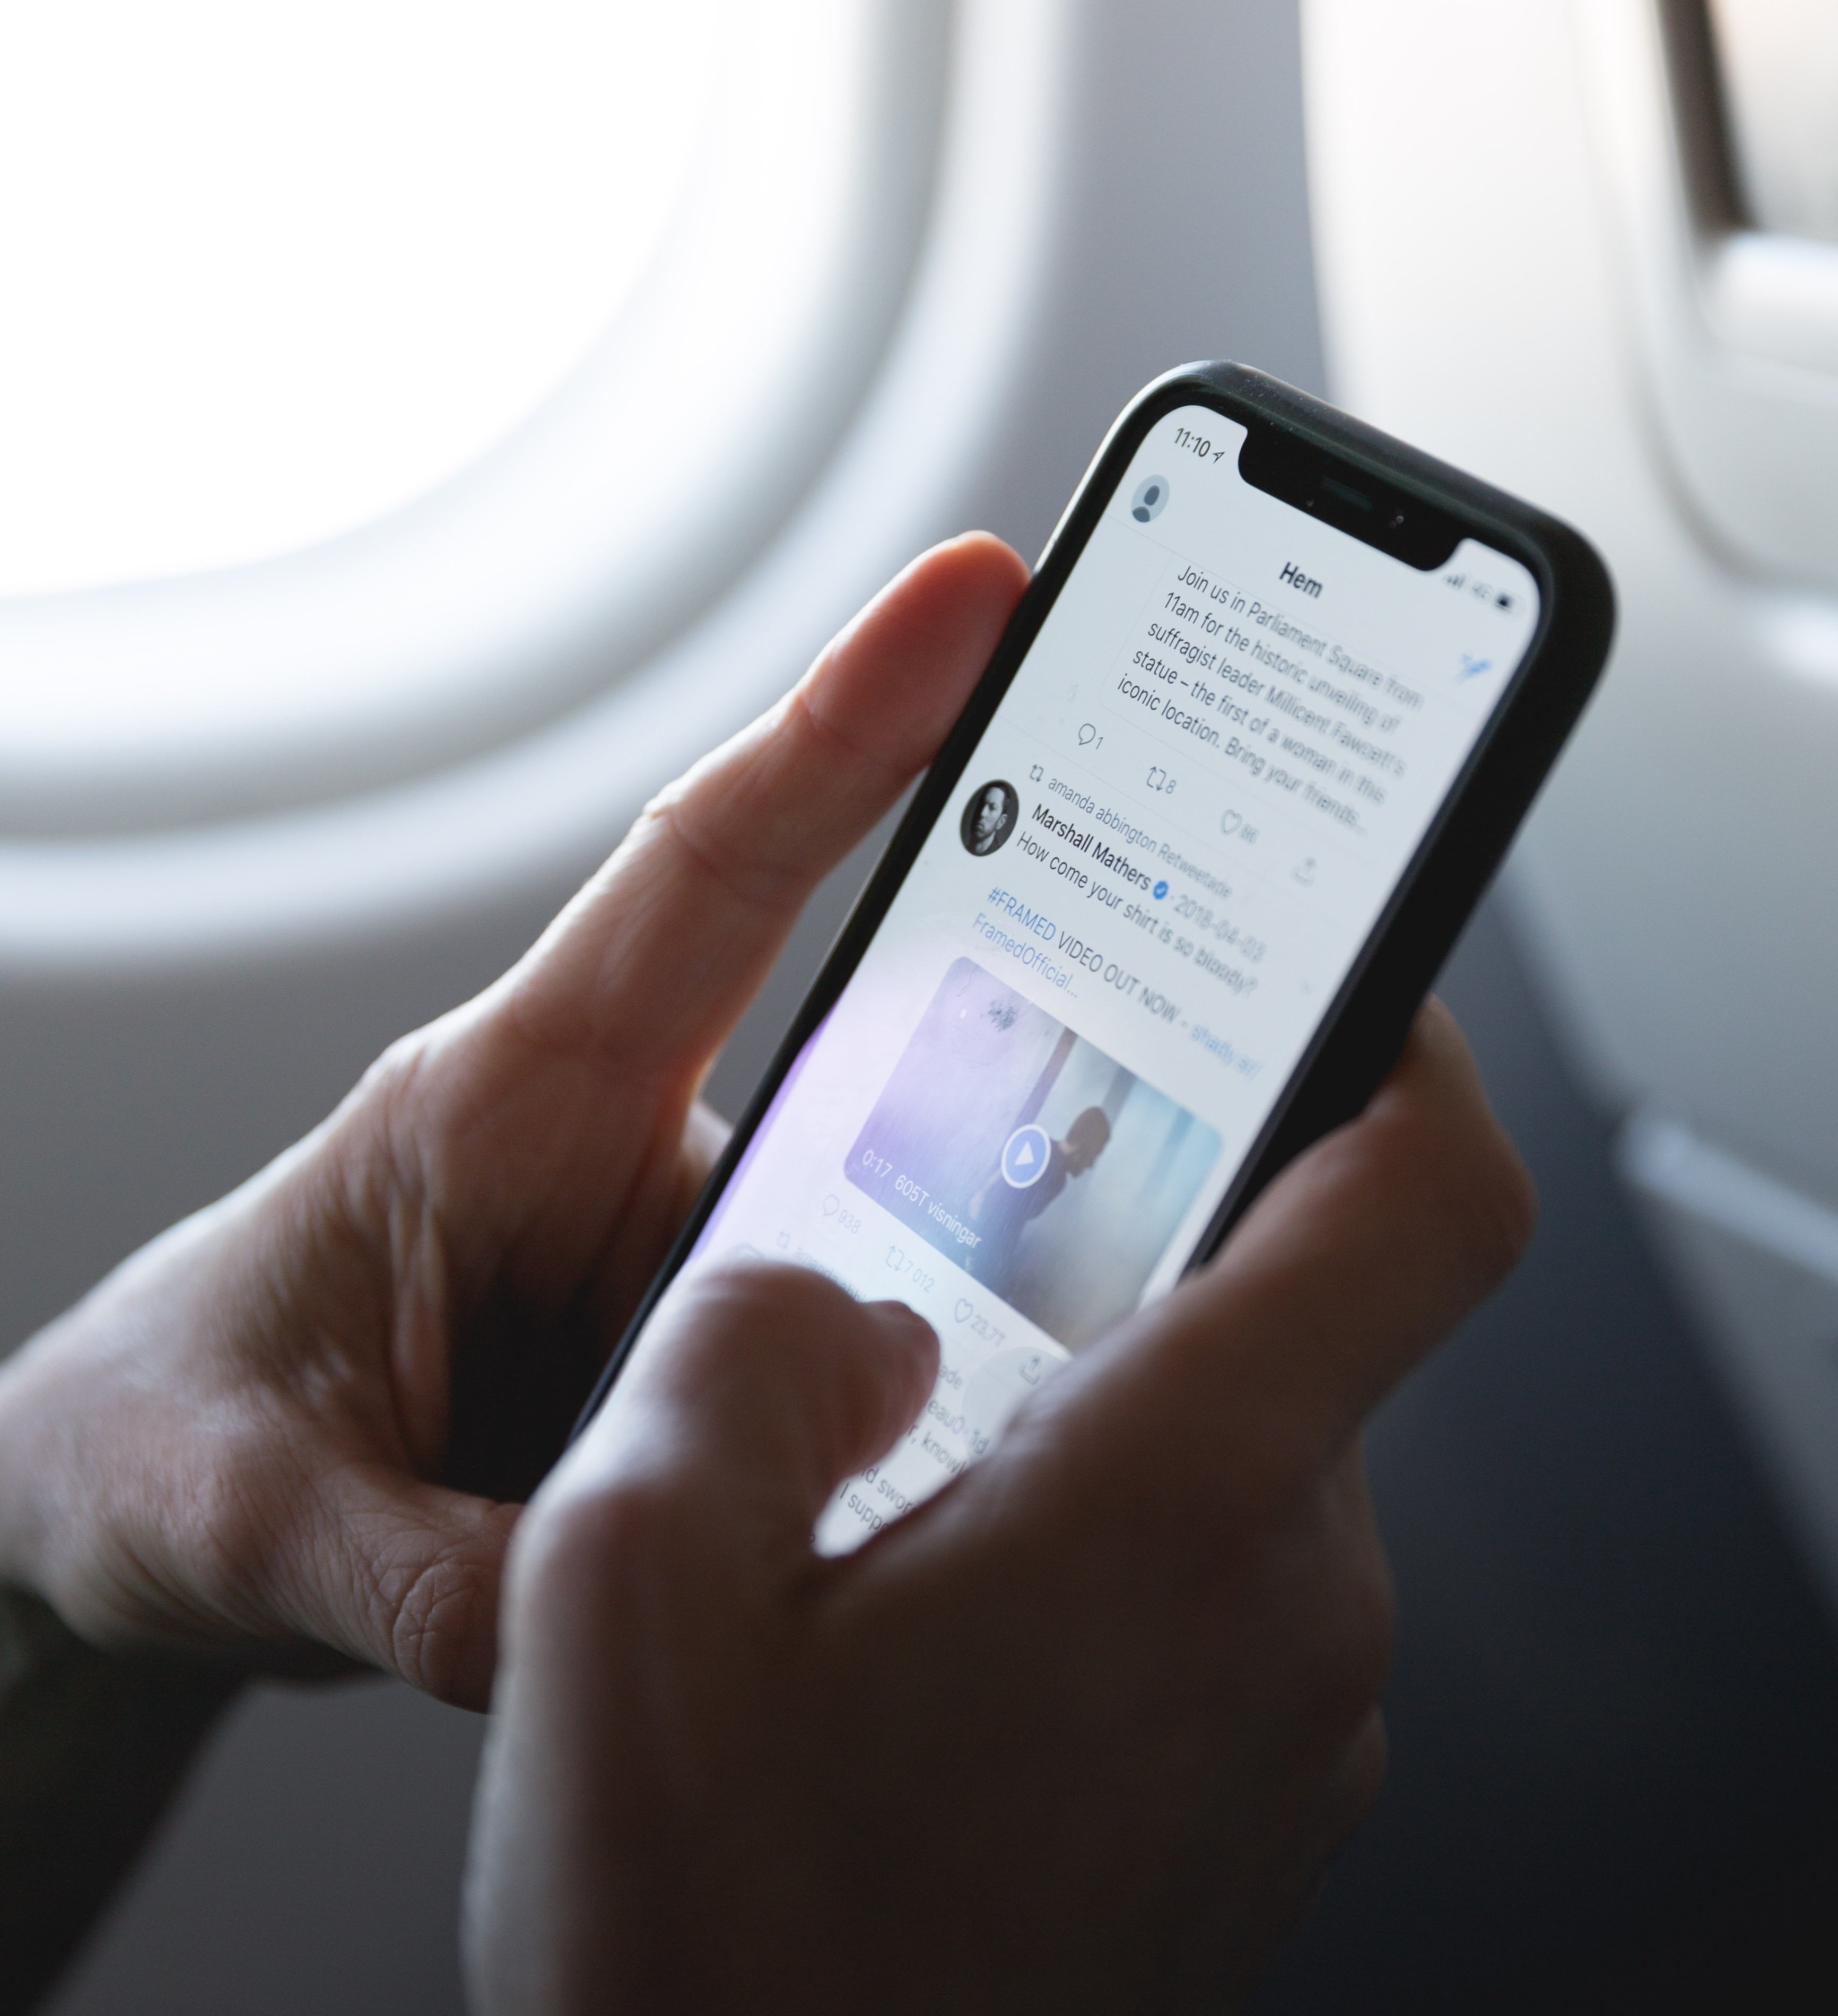 Wi-Fi on a plane: which airlines have it and how much it costs